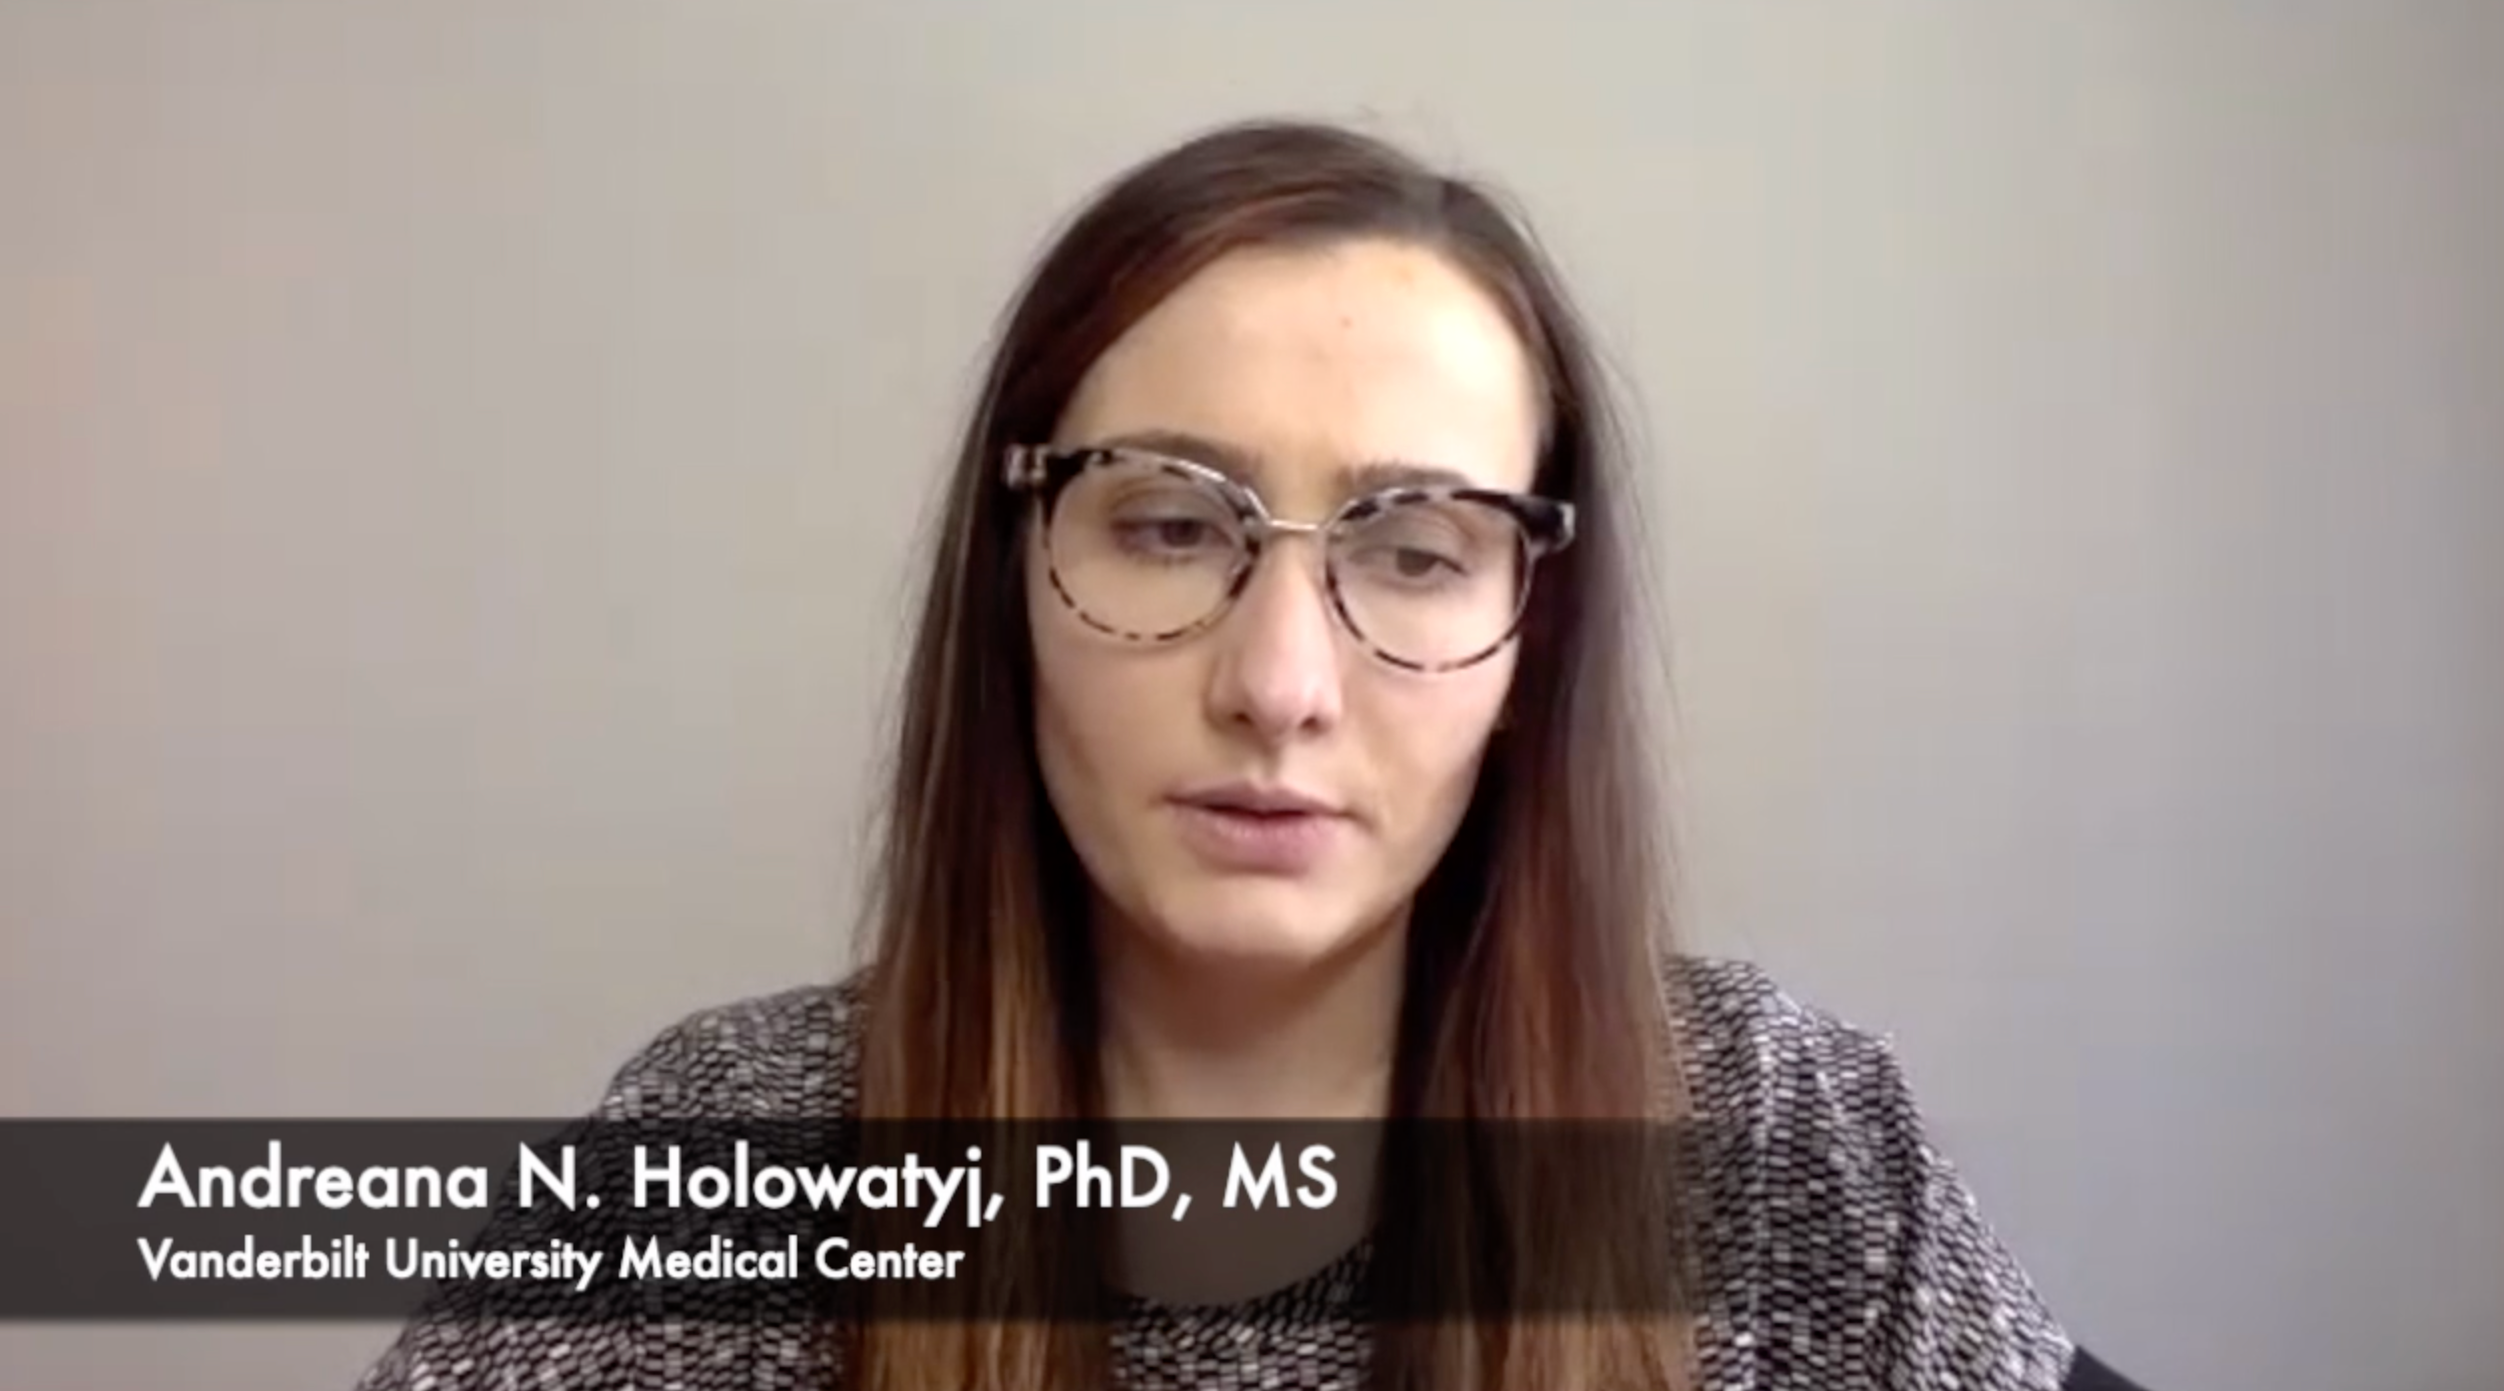 Andreana N. Holowatyj, PhD, MS, Discusses Focal Questions Regarding Colorectal Cancer Disparities